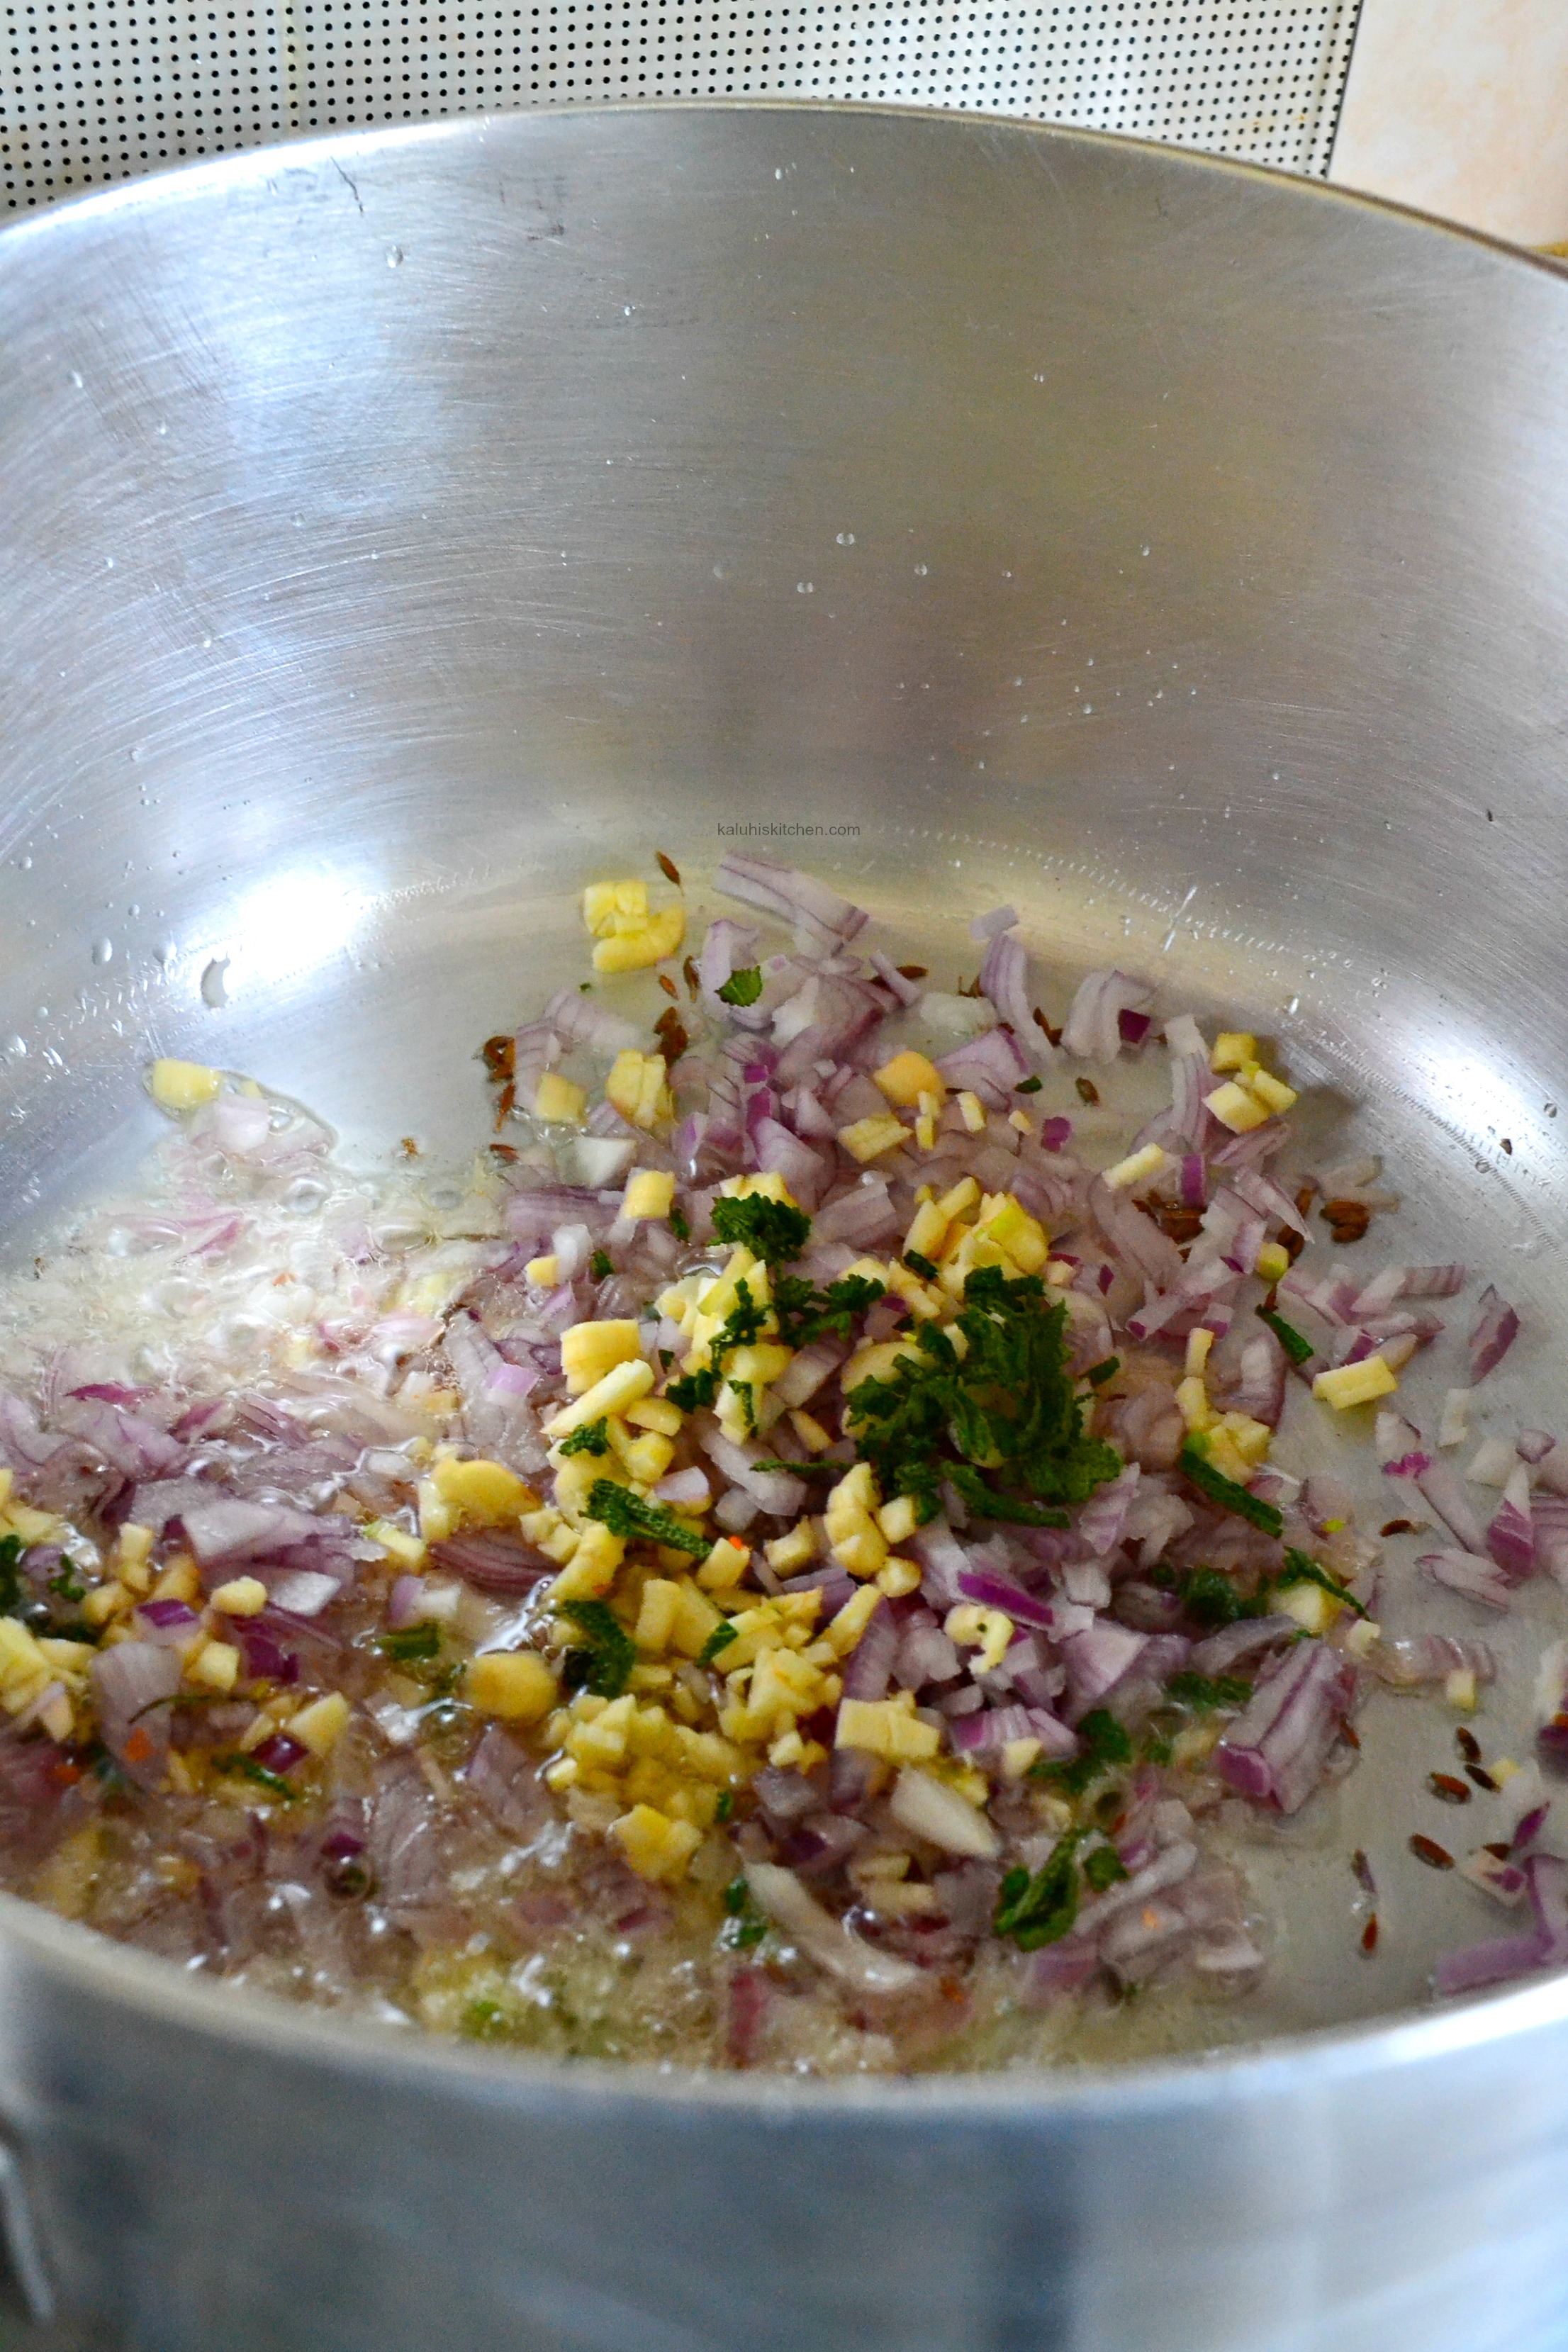 add-some-cumin-seeds-red-onion-sage-and-finely-chipped-garlic-to-cook-until-fragrant_how-to-make-njahi_best-njahi-recipes_kaluhiskitchen-com